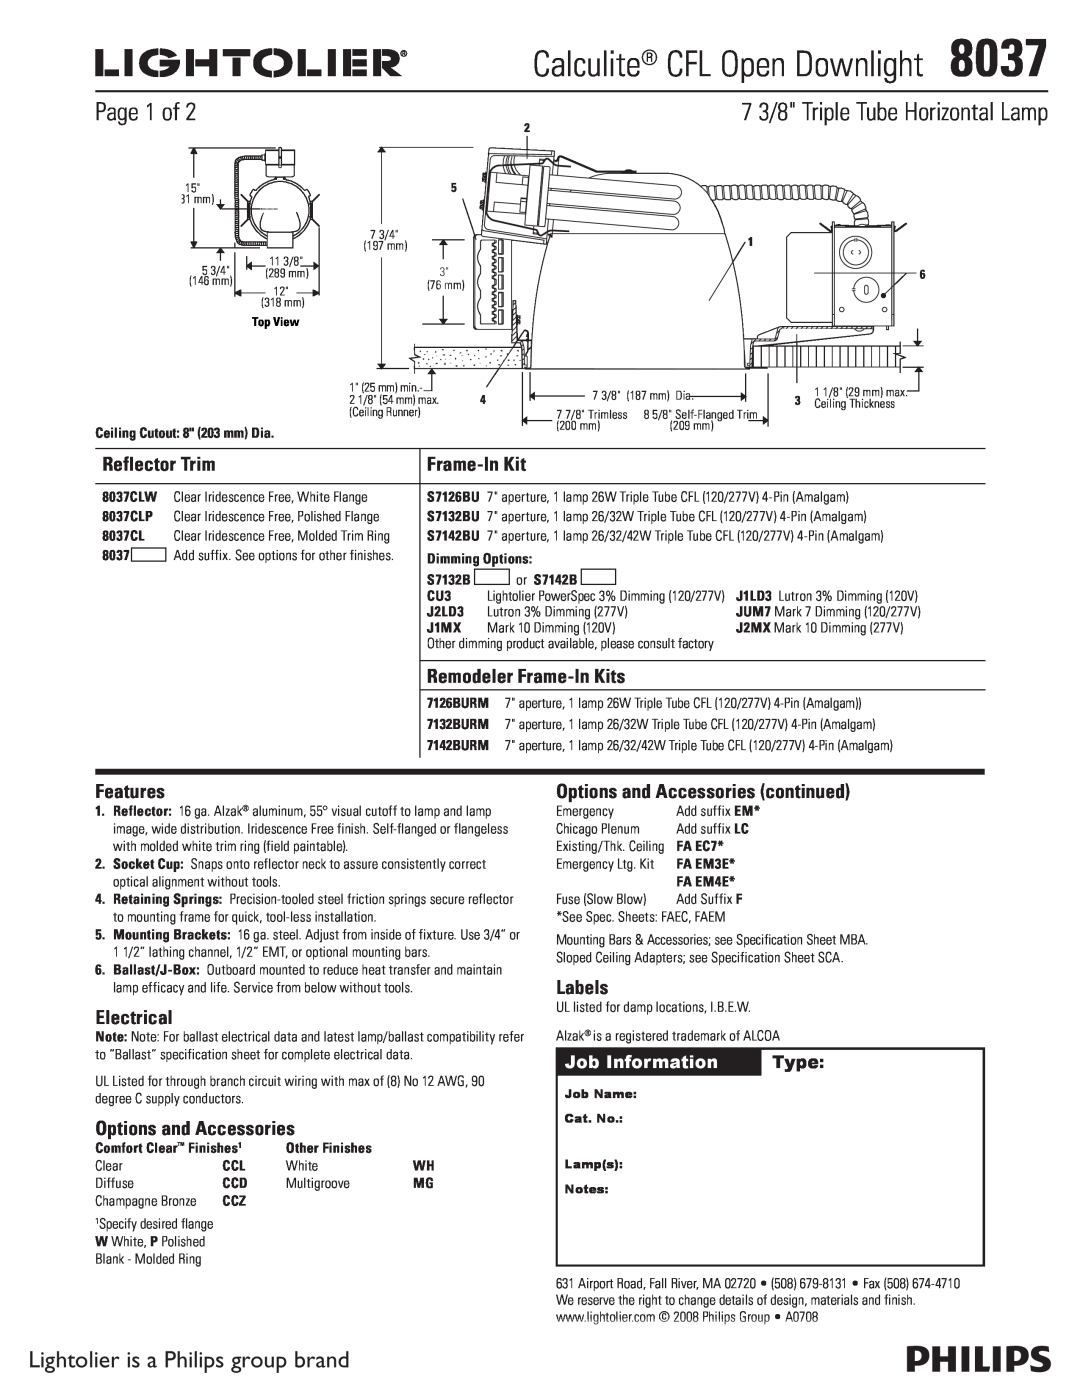 Lightolier 8037 specifications Page 1 of, Lightolier is a Philips group brand, Job Information, Type, Reflector Trim 